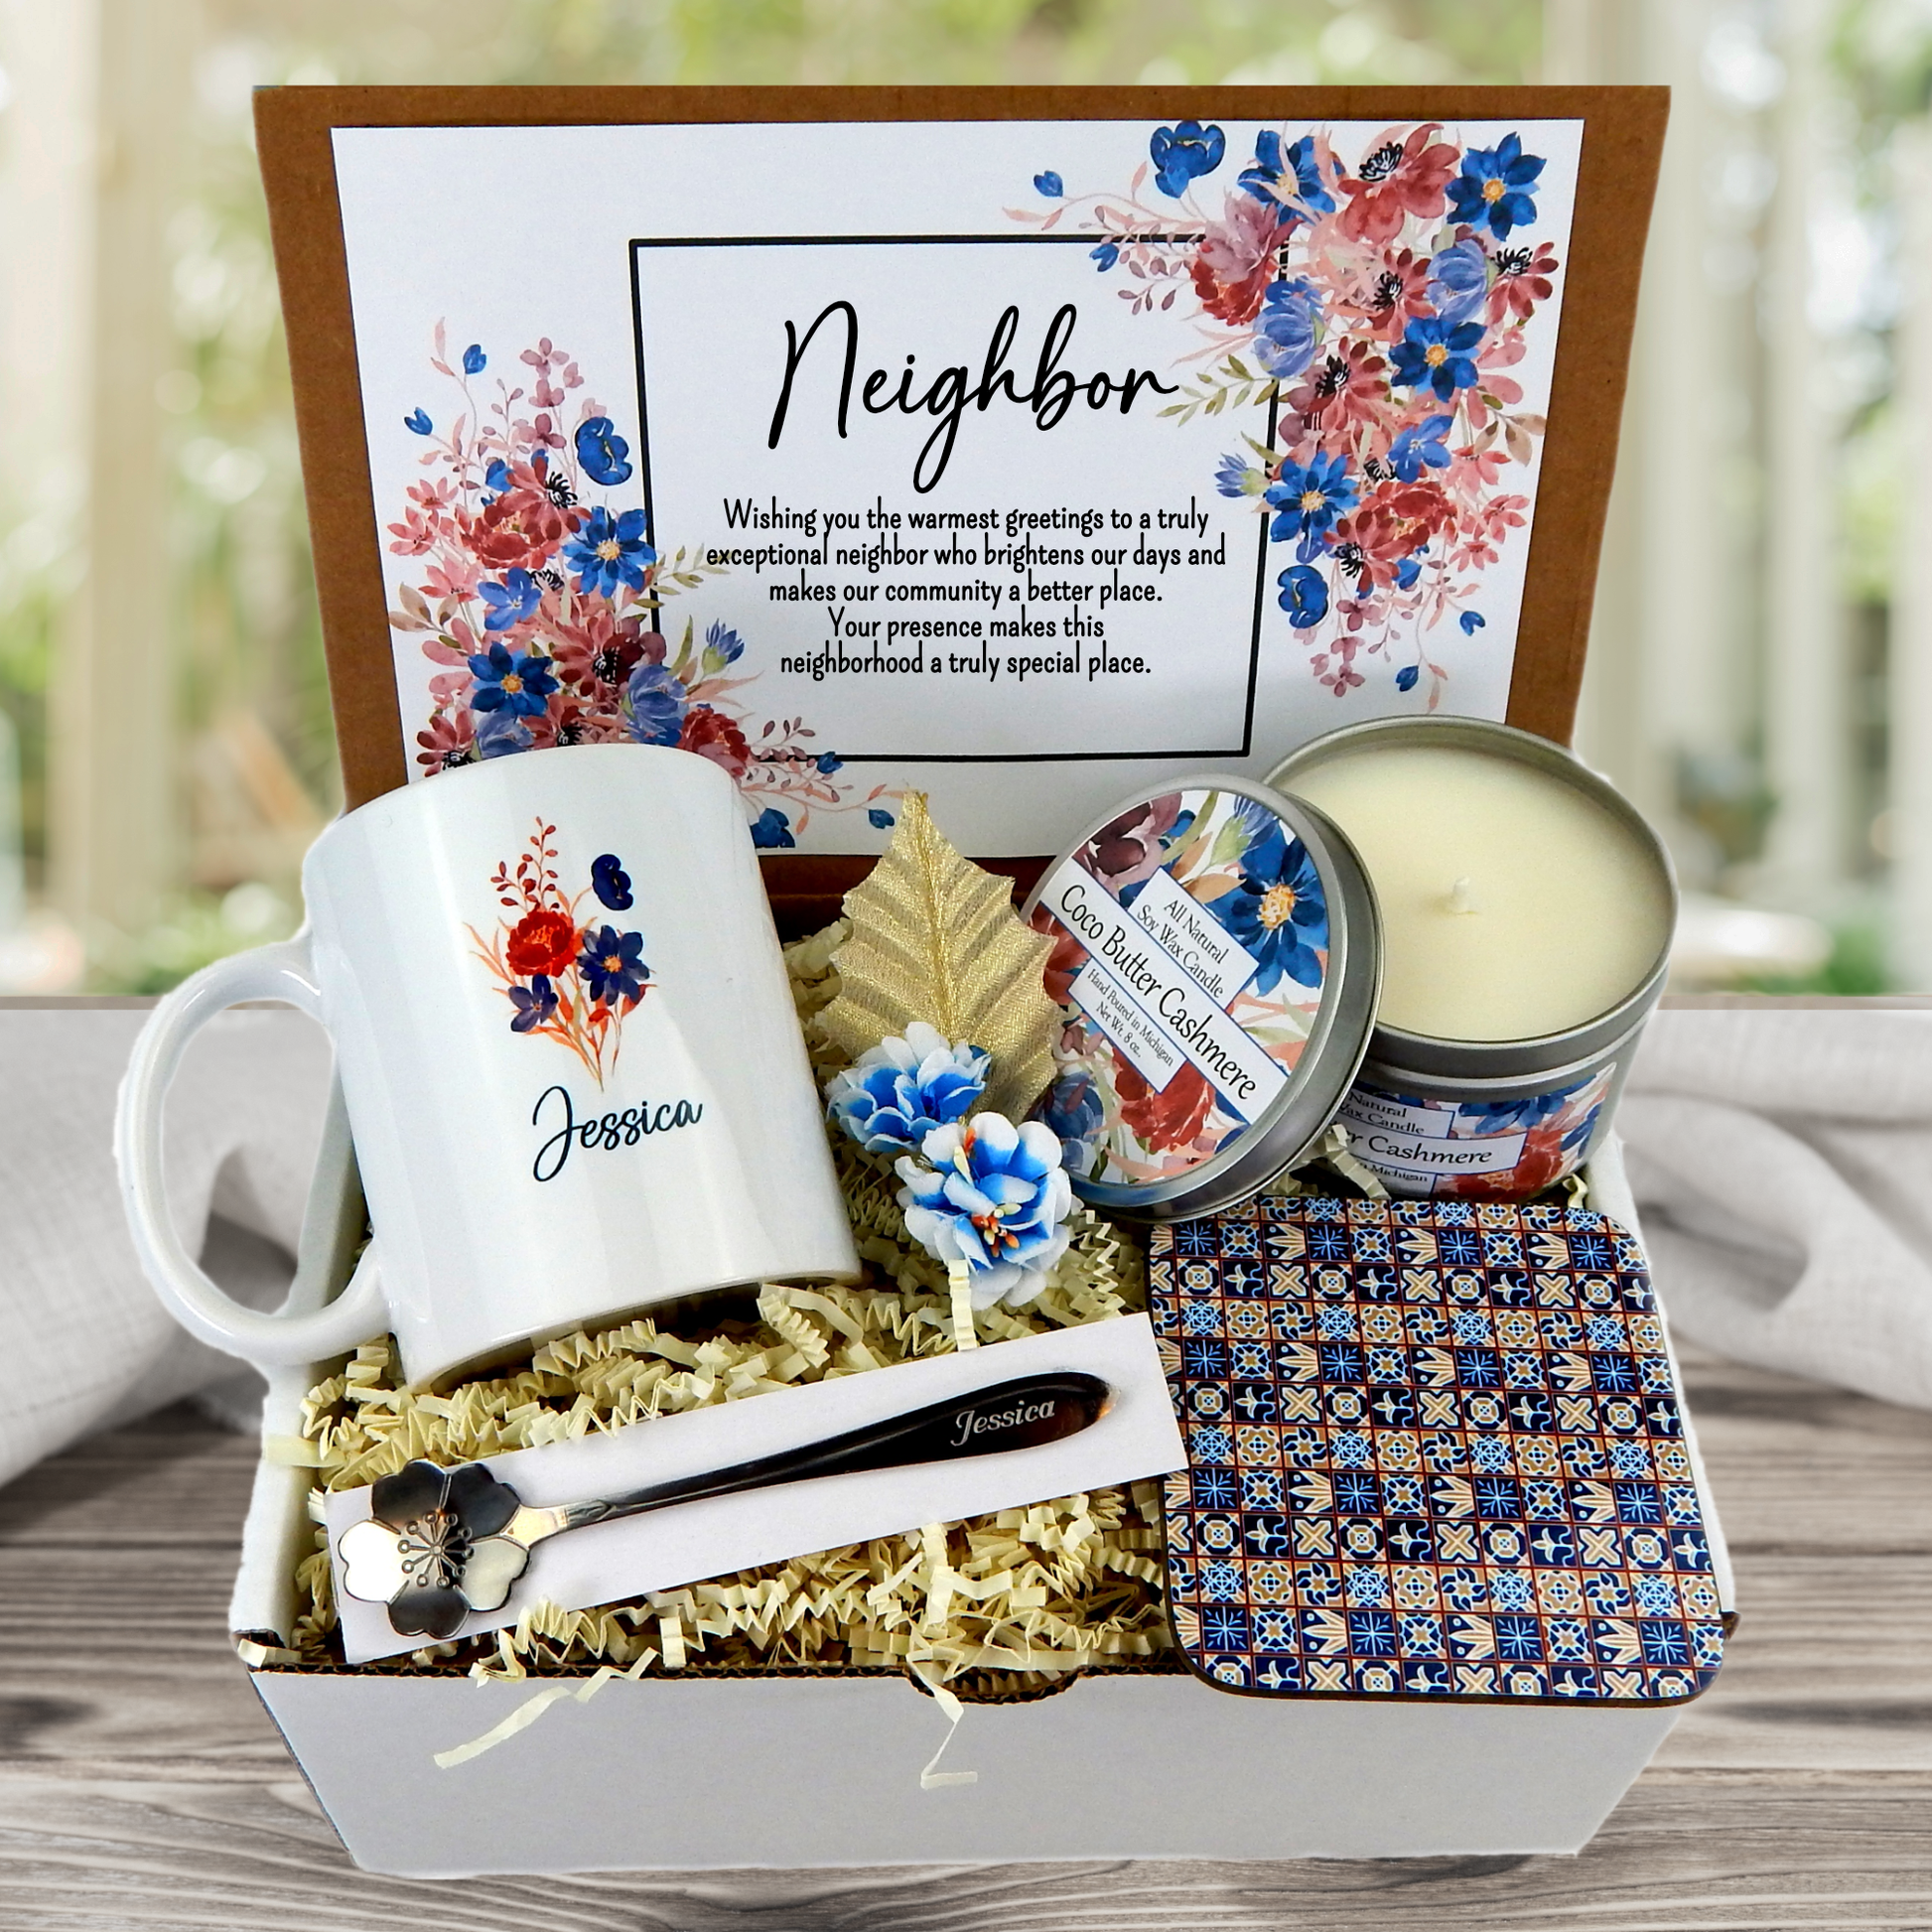 Warm Welcome: Neighbor Gift Basket with Personalized Mug, Spoon, and Candle